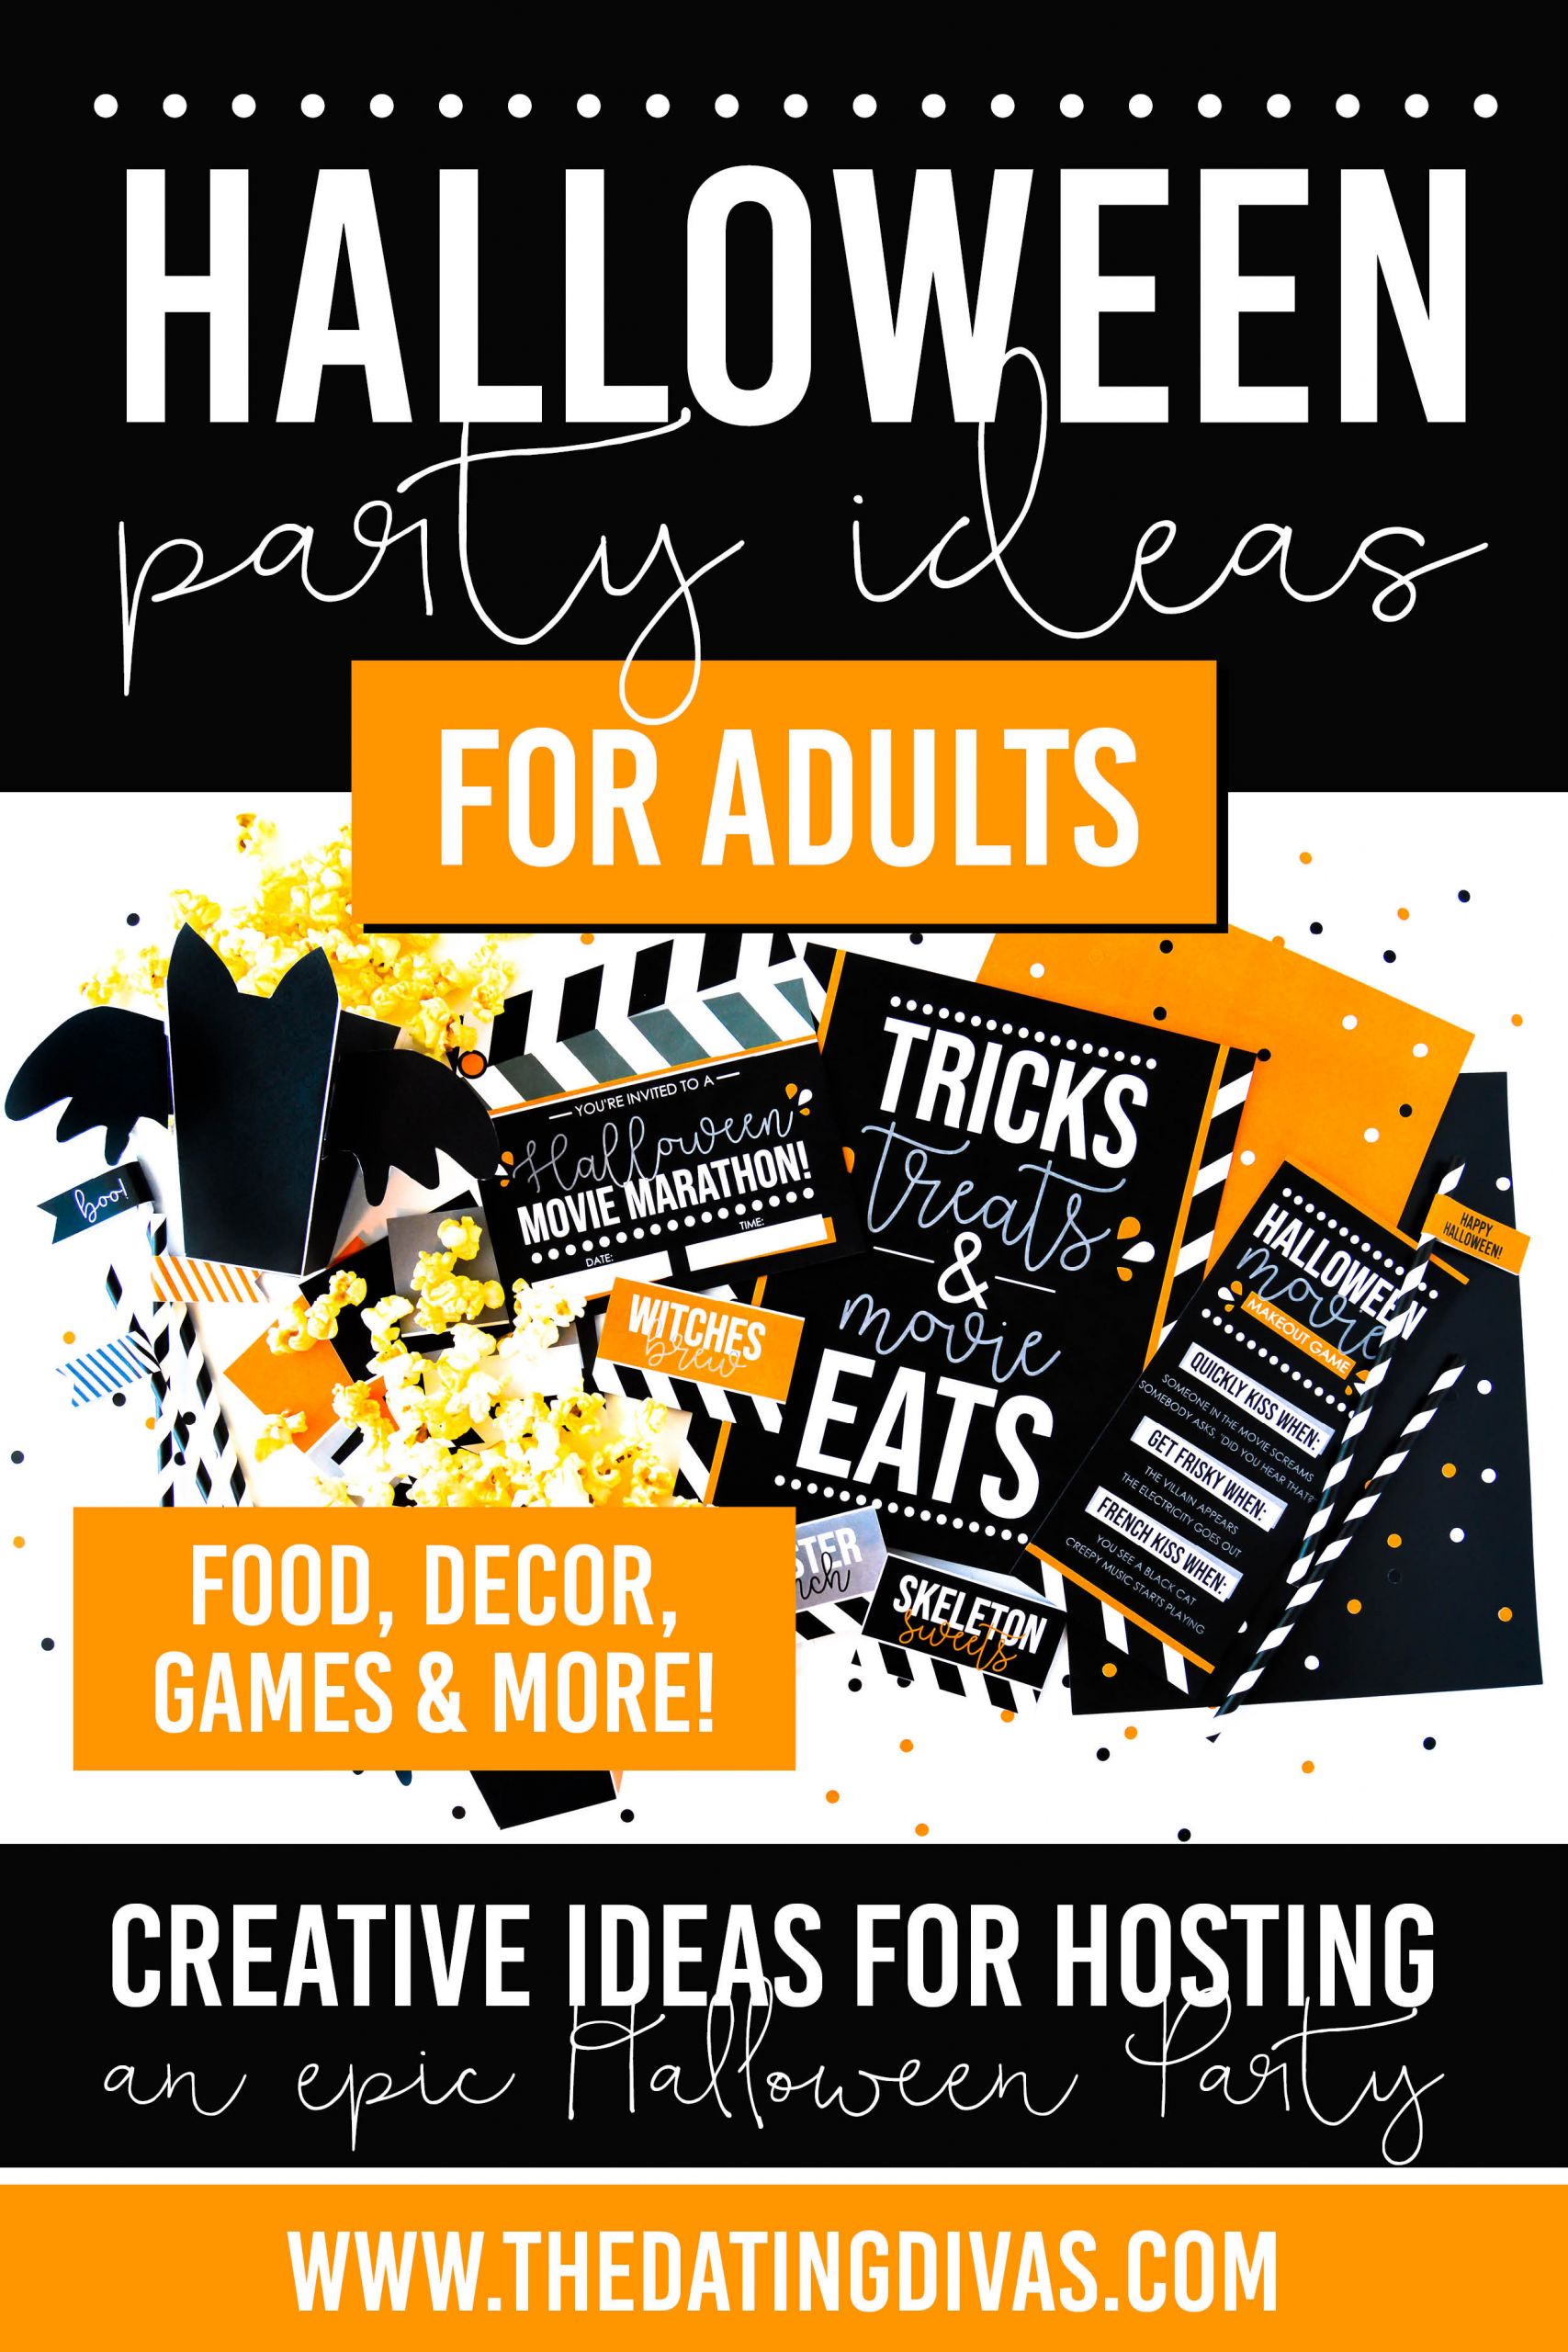 Halloween Party Ideas For Seniors
 Get Our Adult Halloween Party Ideas